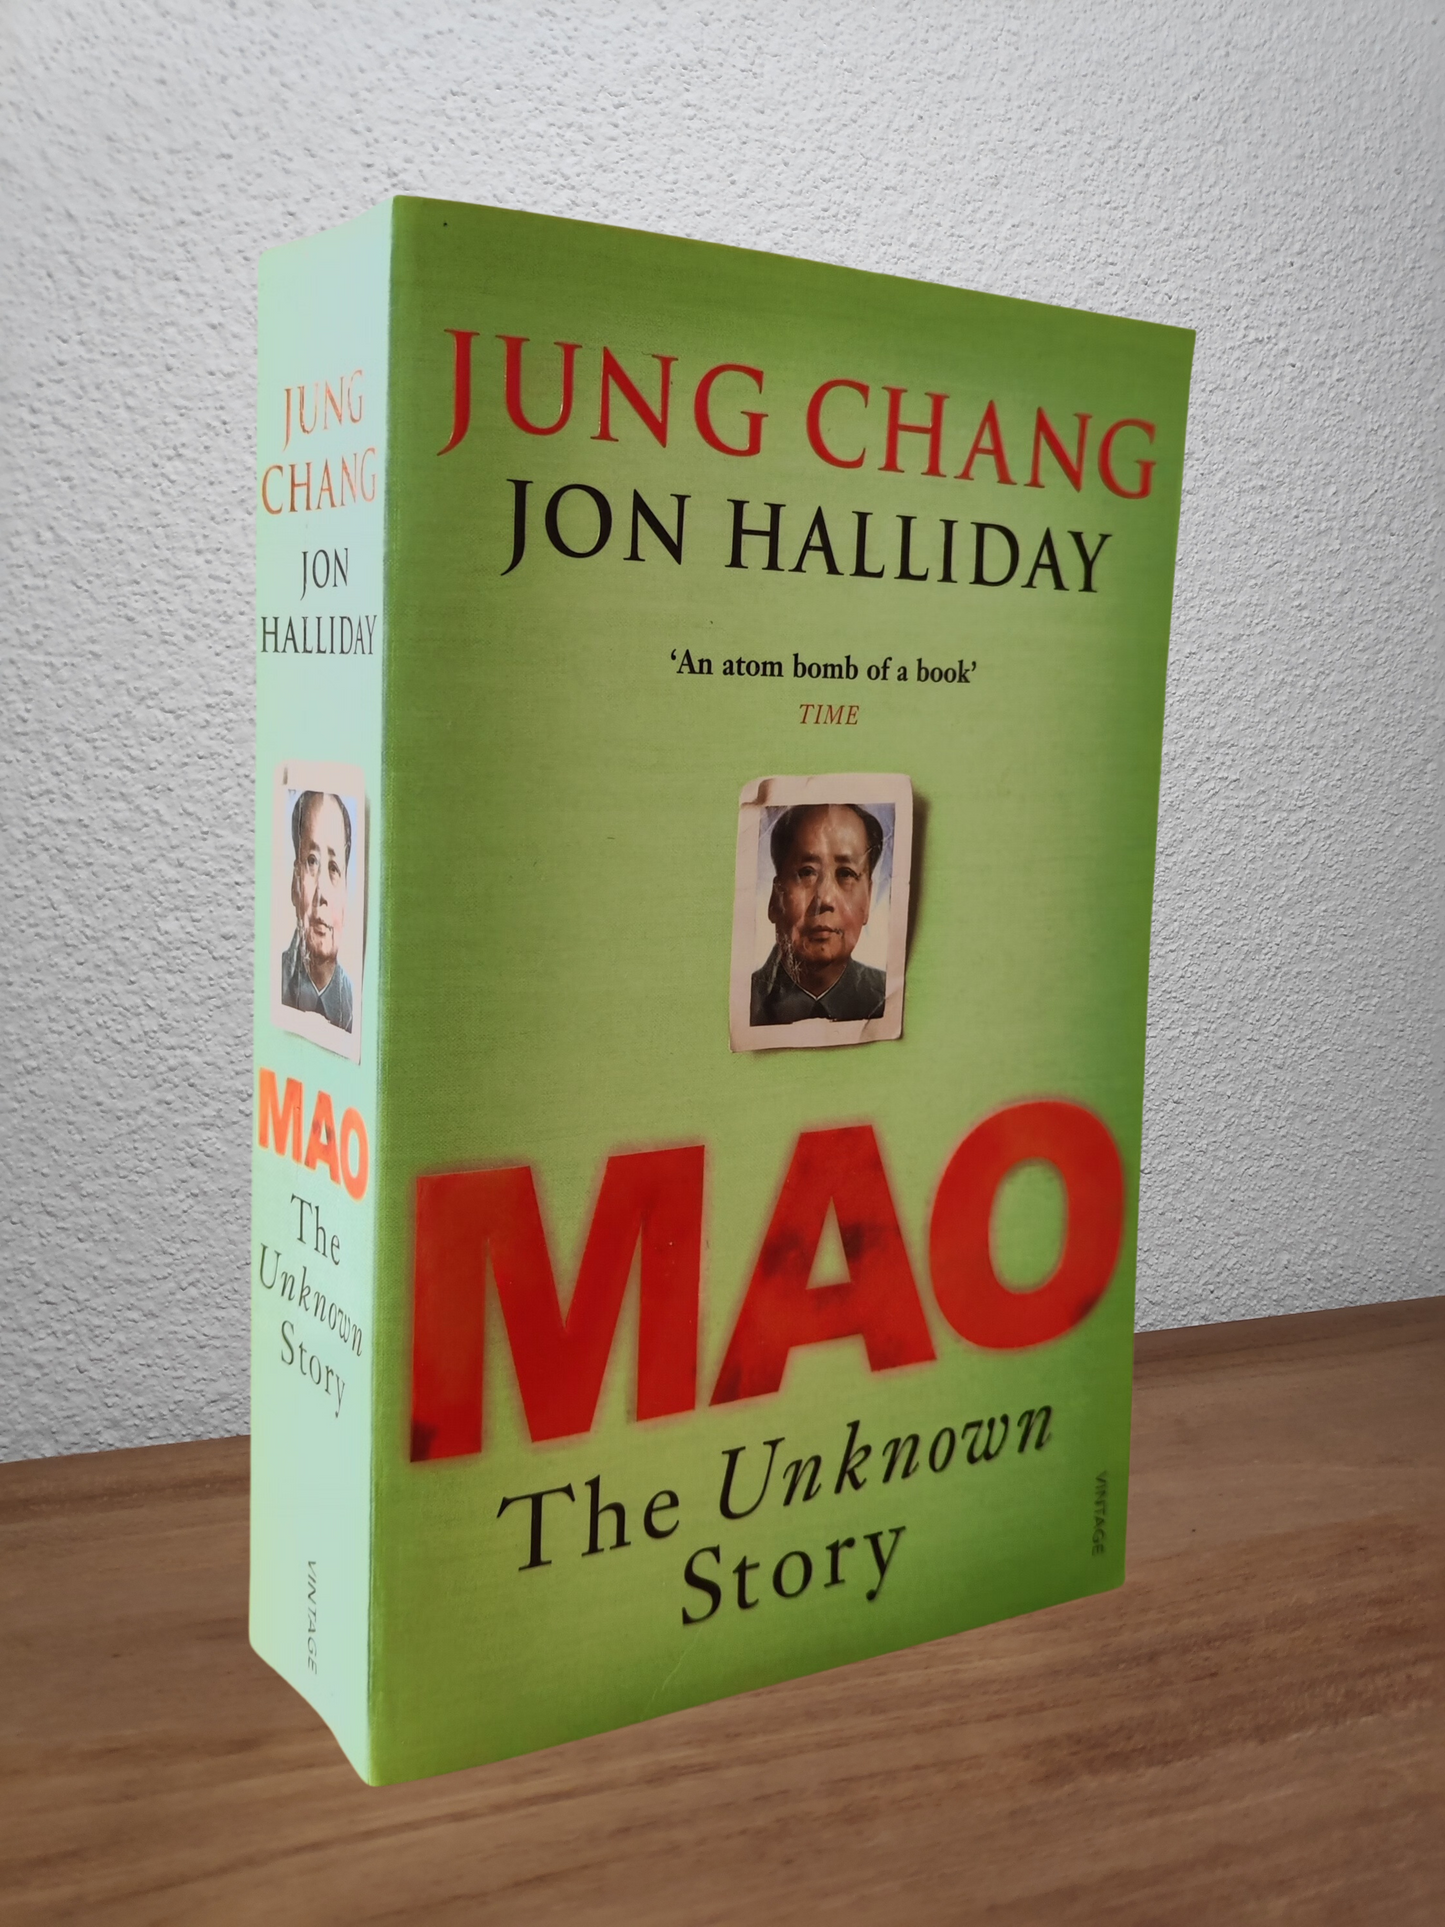 Jung Chang & Jon Halliday - Mao: The Unknown Story